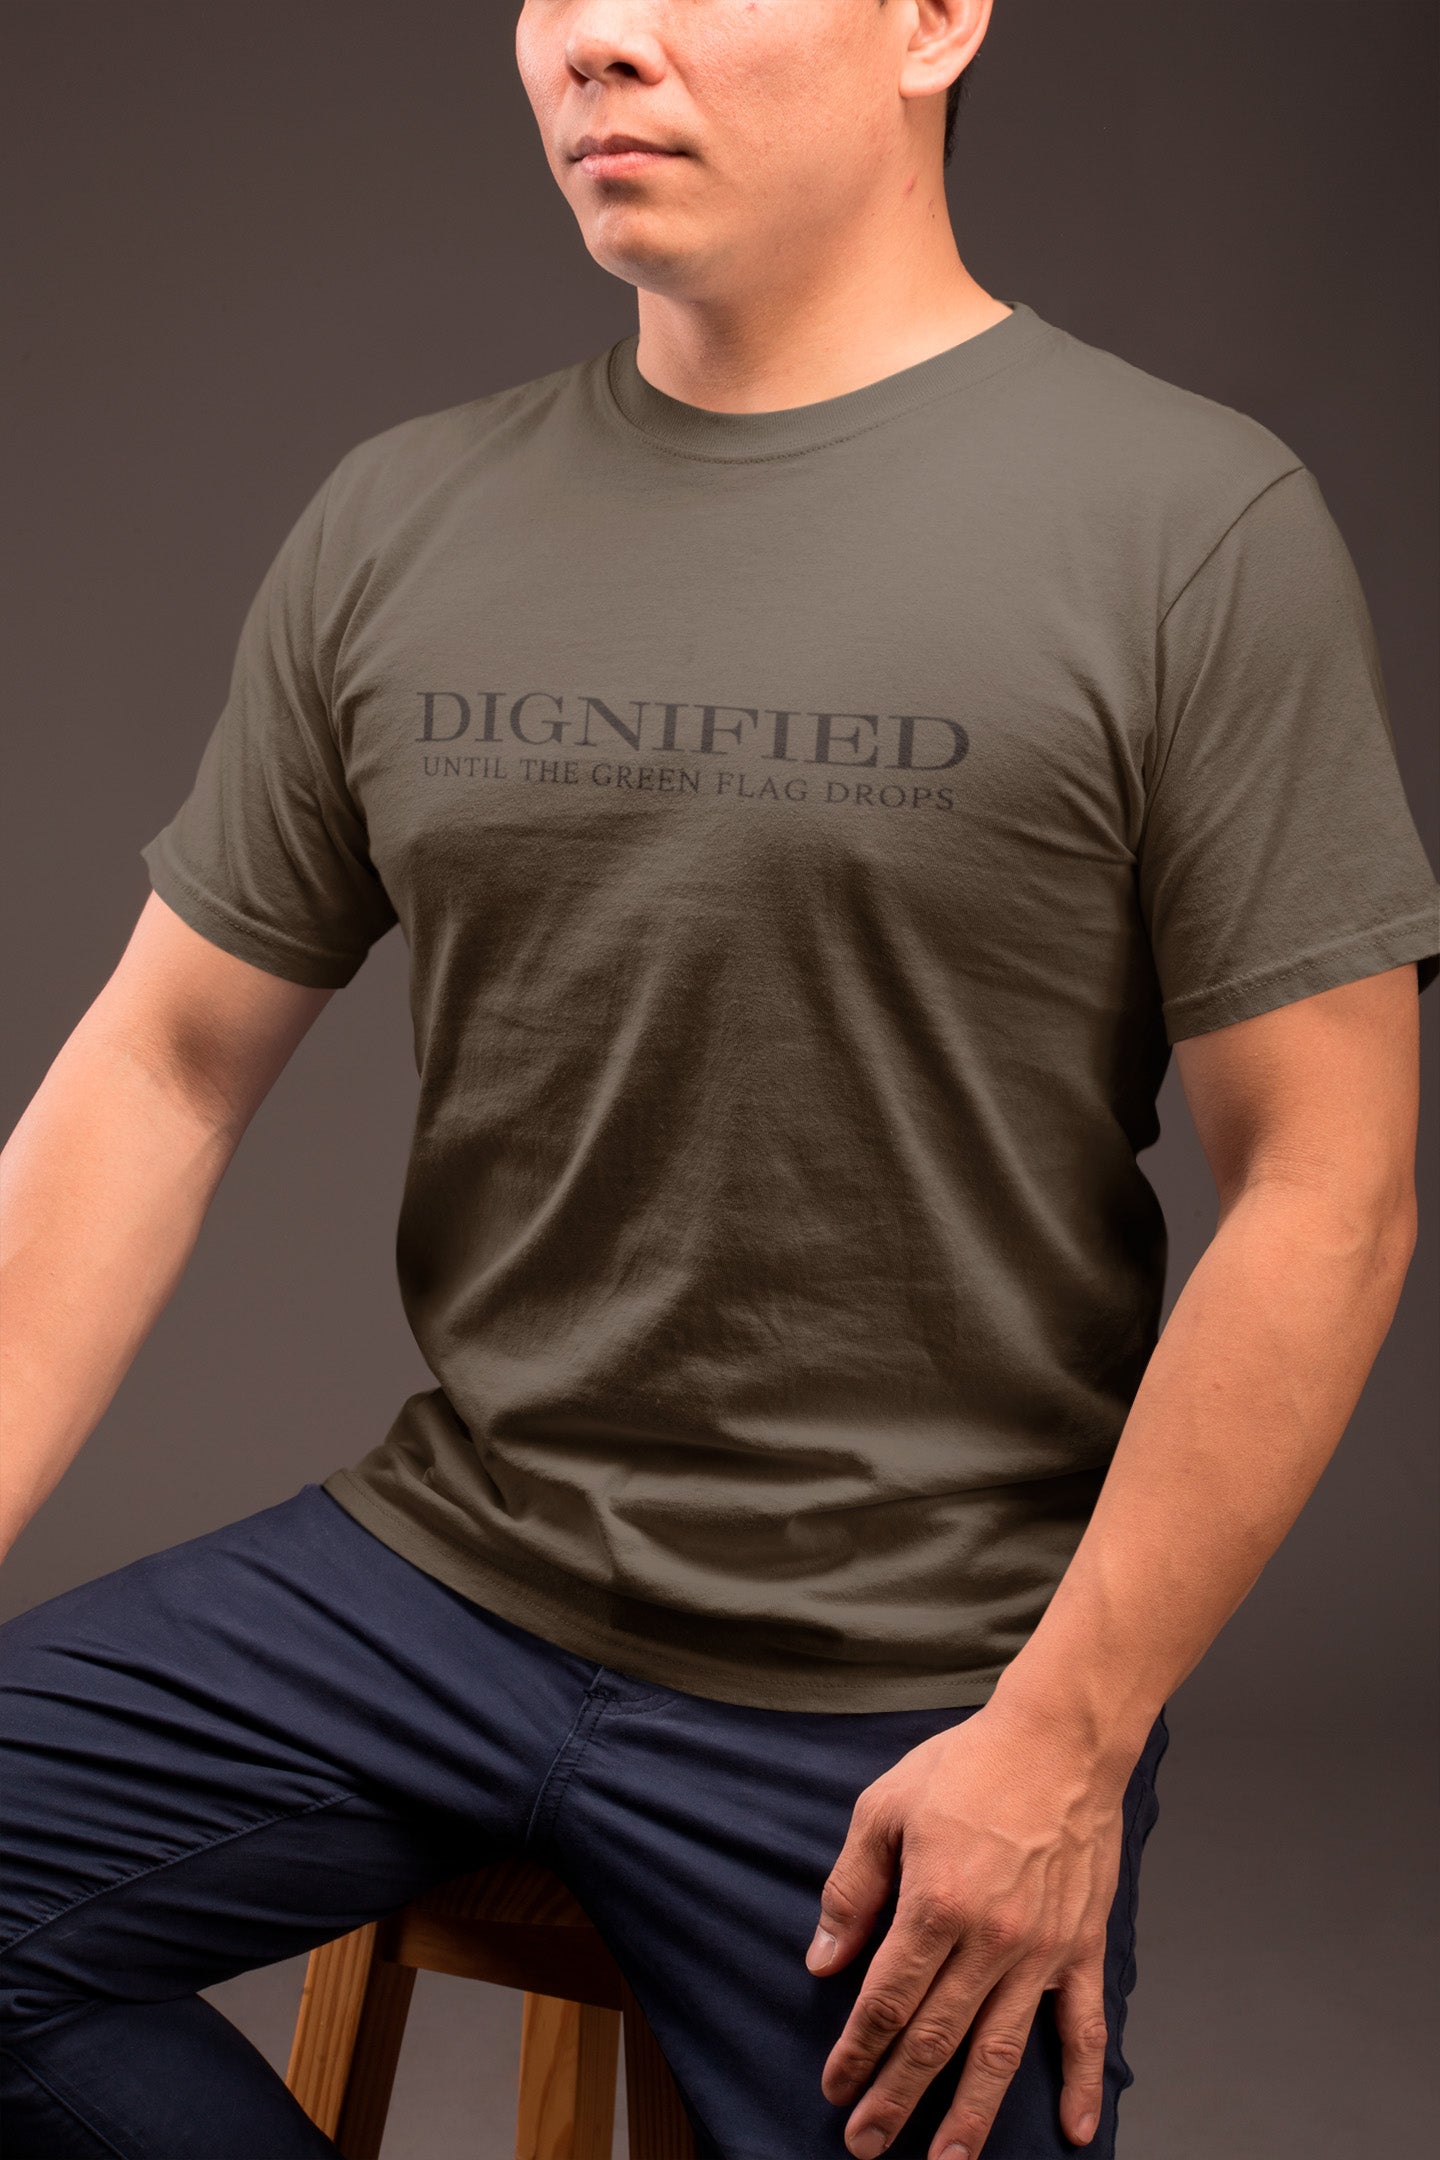 dignified-until-the-green-flag-drops-army-green-mens-t-shirt-crew-neck-tee-mockup-of-a-guy-in-blue-trousers-sitting-on-a-stool-against-a-dark-gray-wall